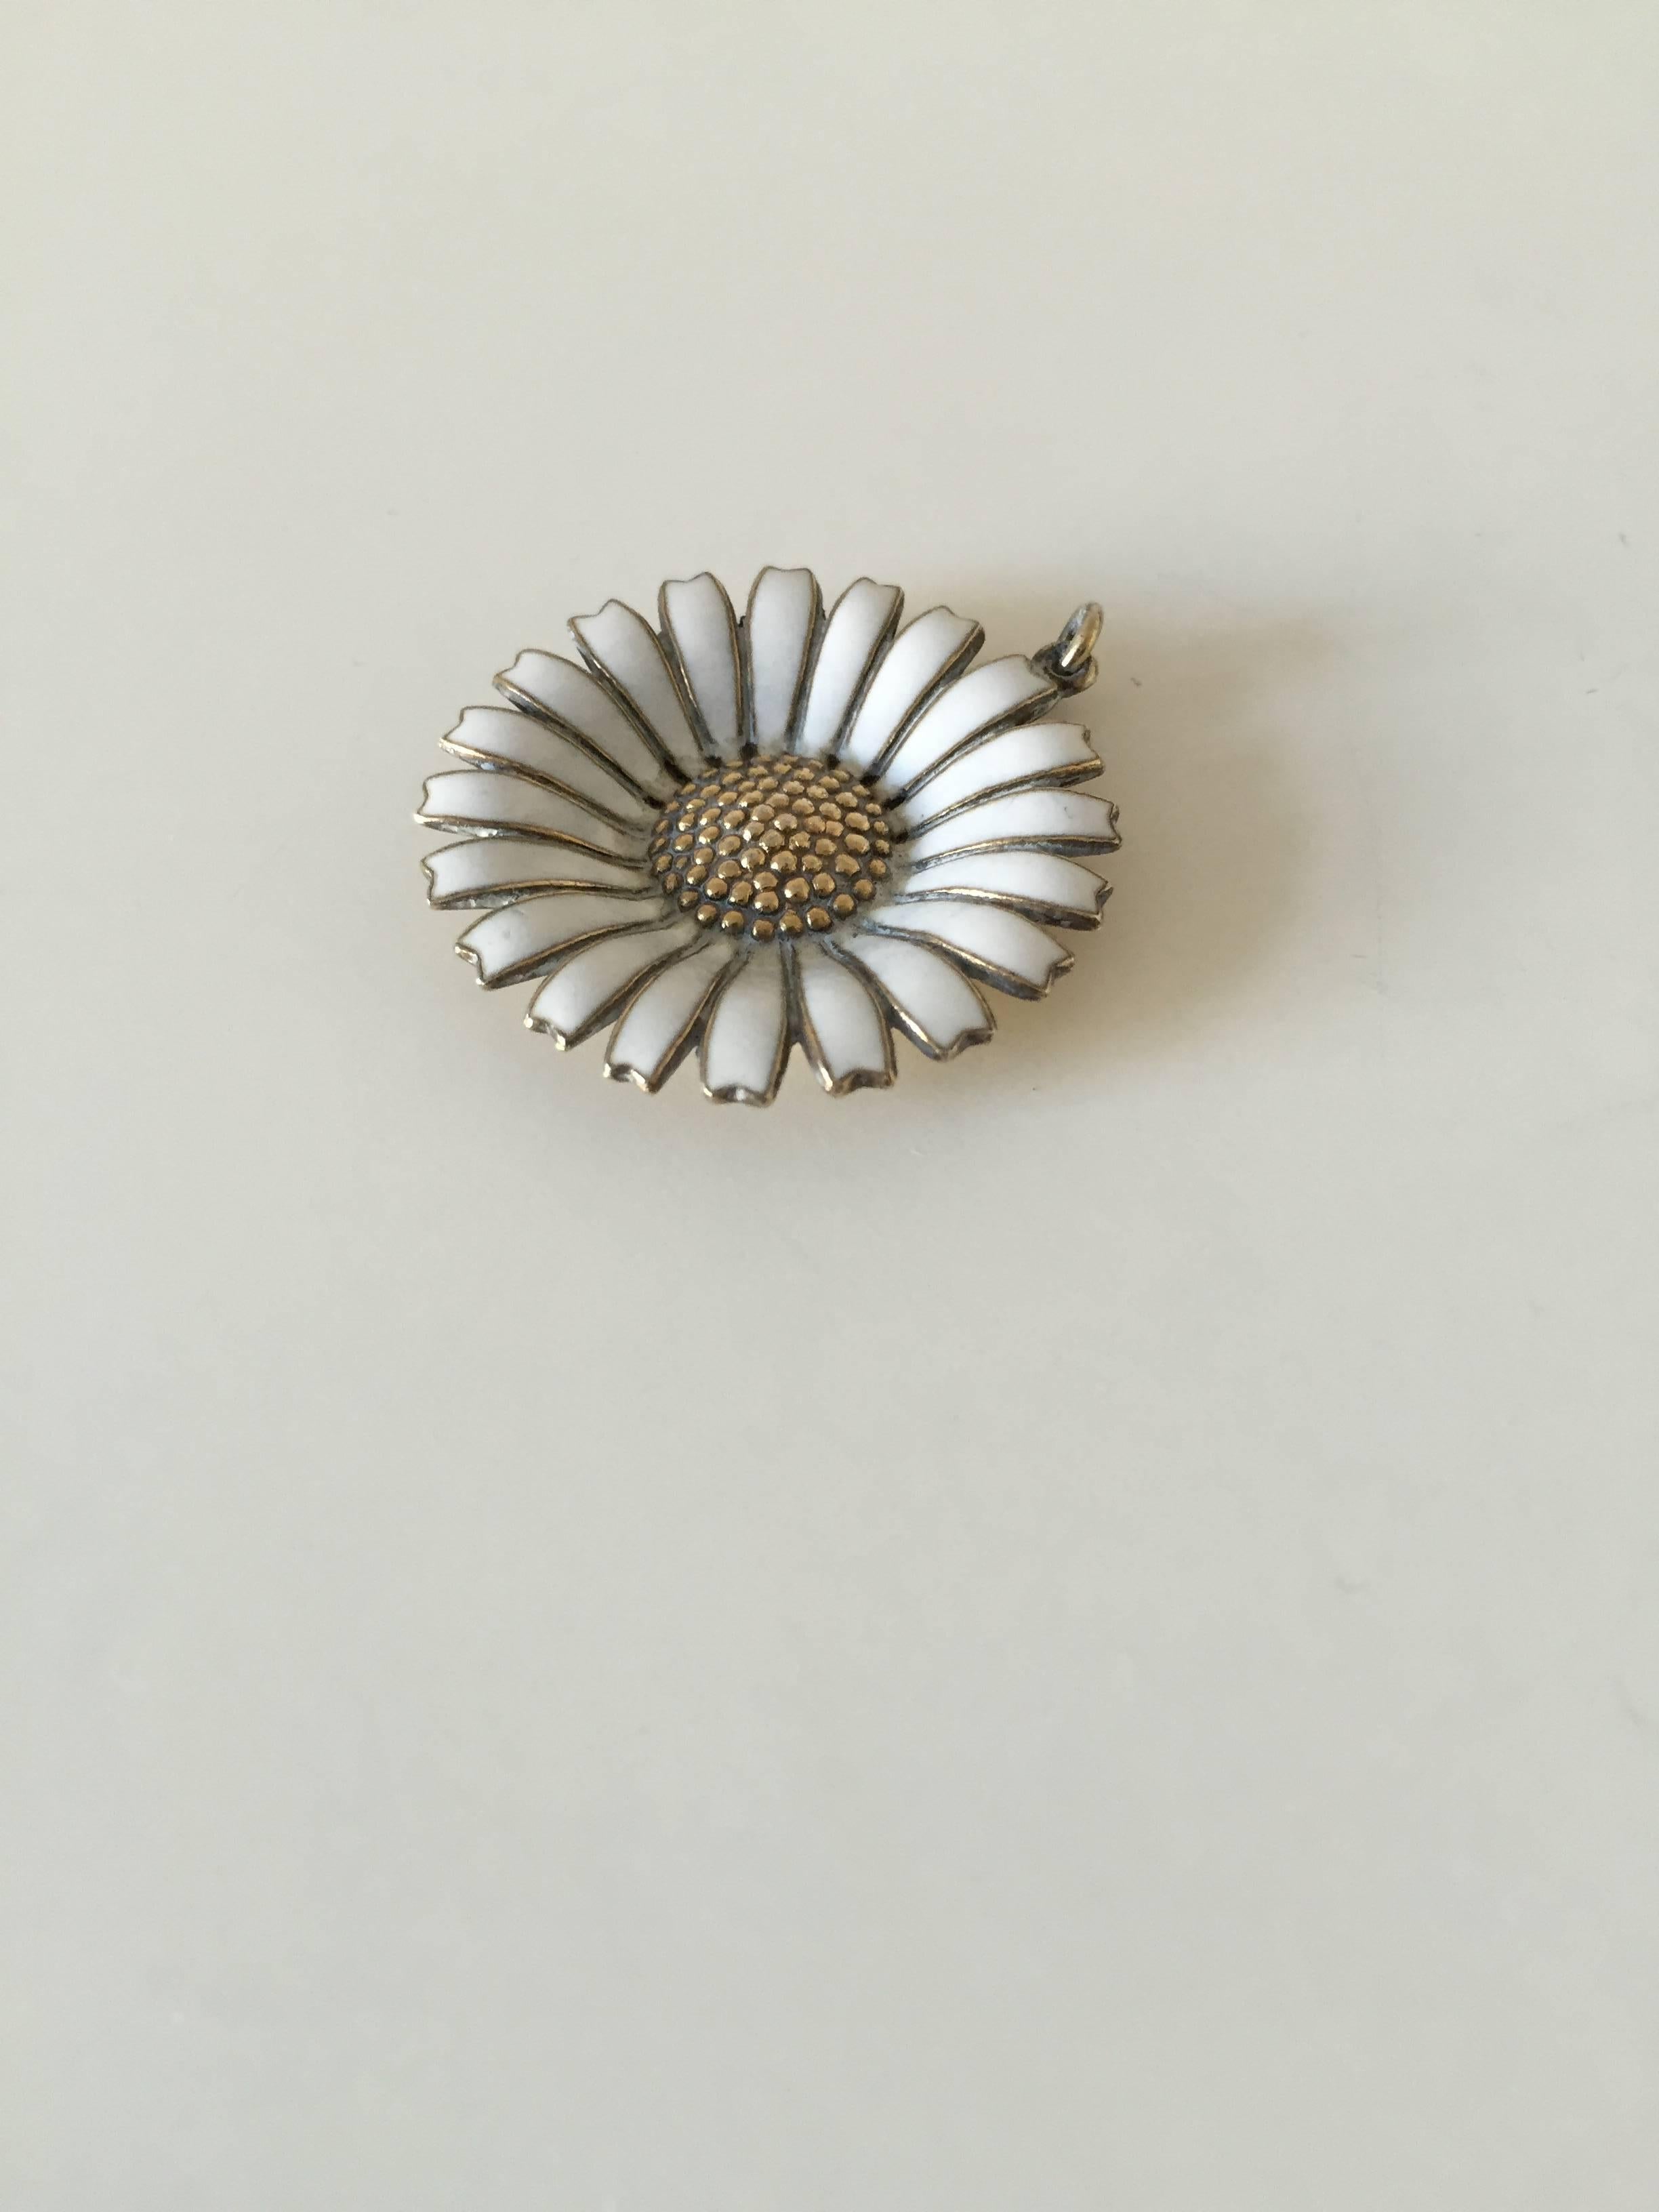 A large Anton Michelsen daisy pendant in gilded sterling silver and white enamel. 

The pendant measures 3 cm in diameter and is in perfect condition.